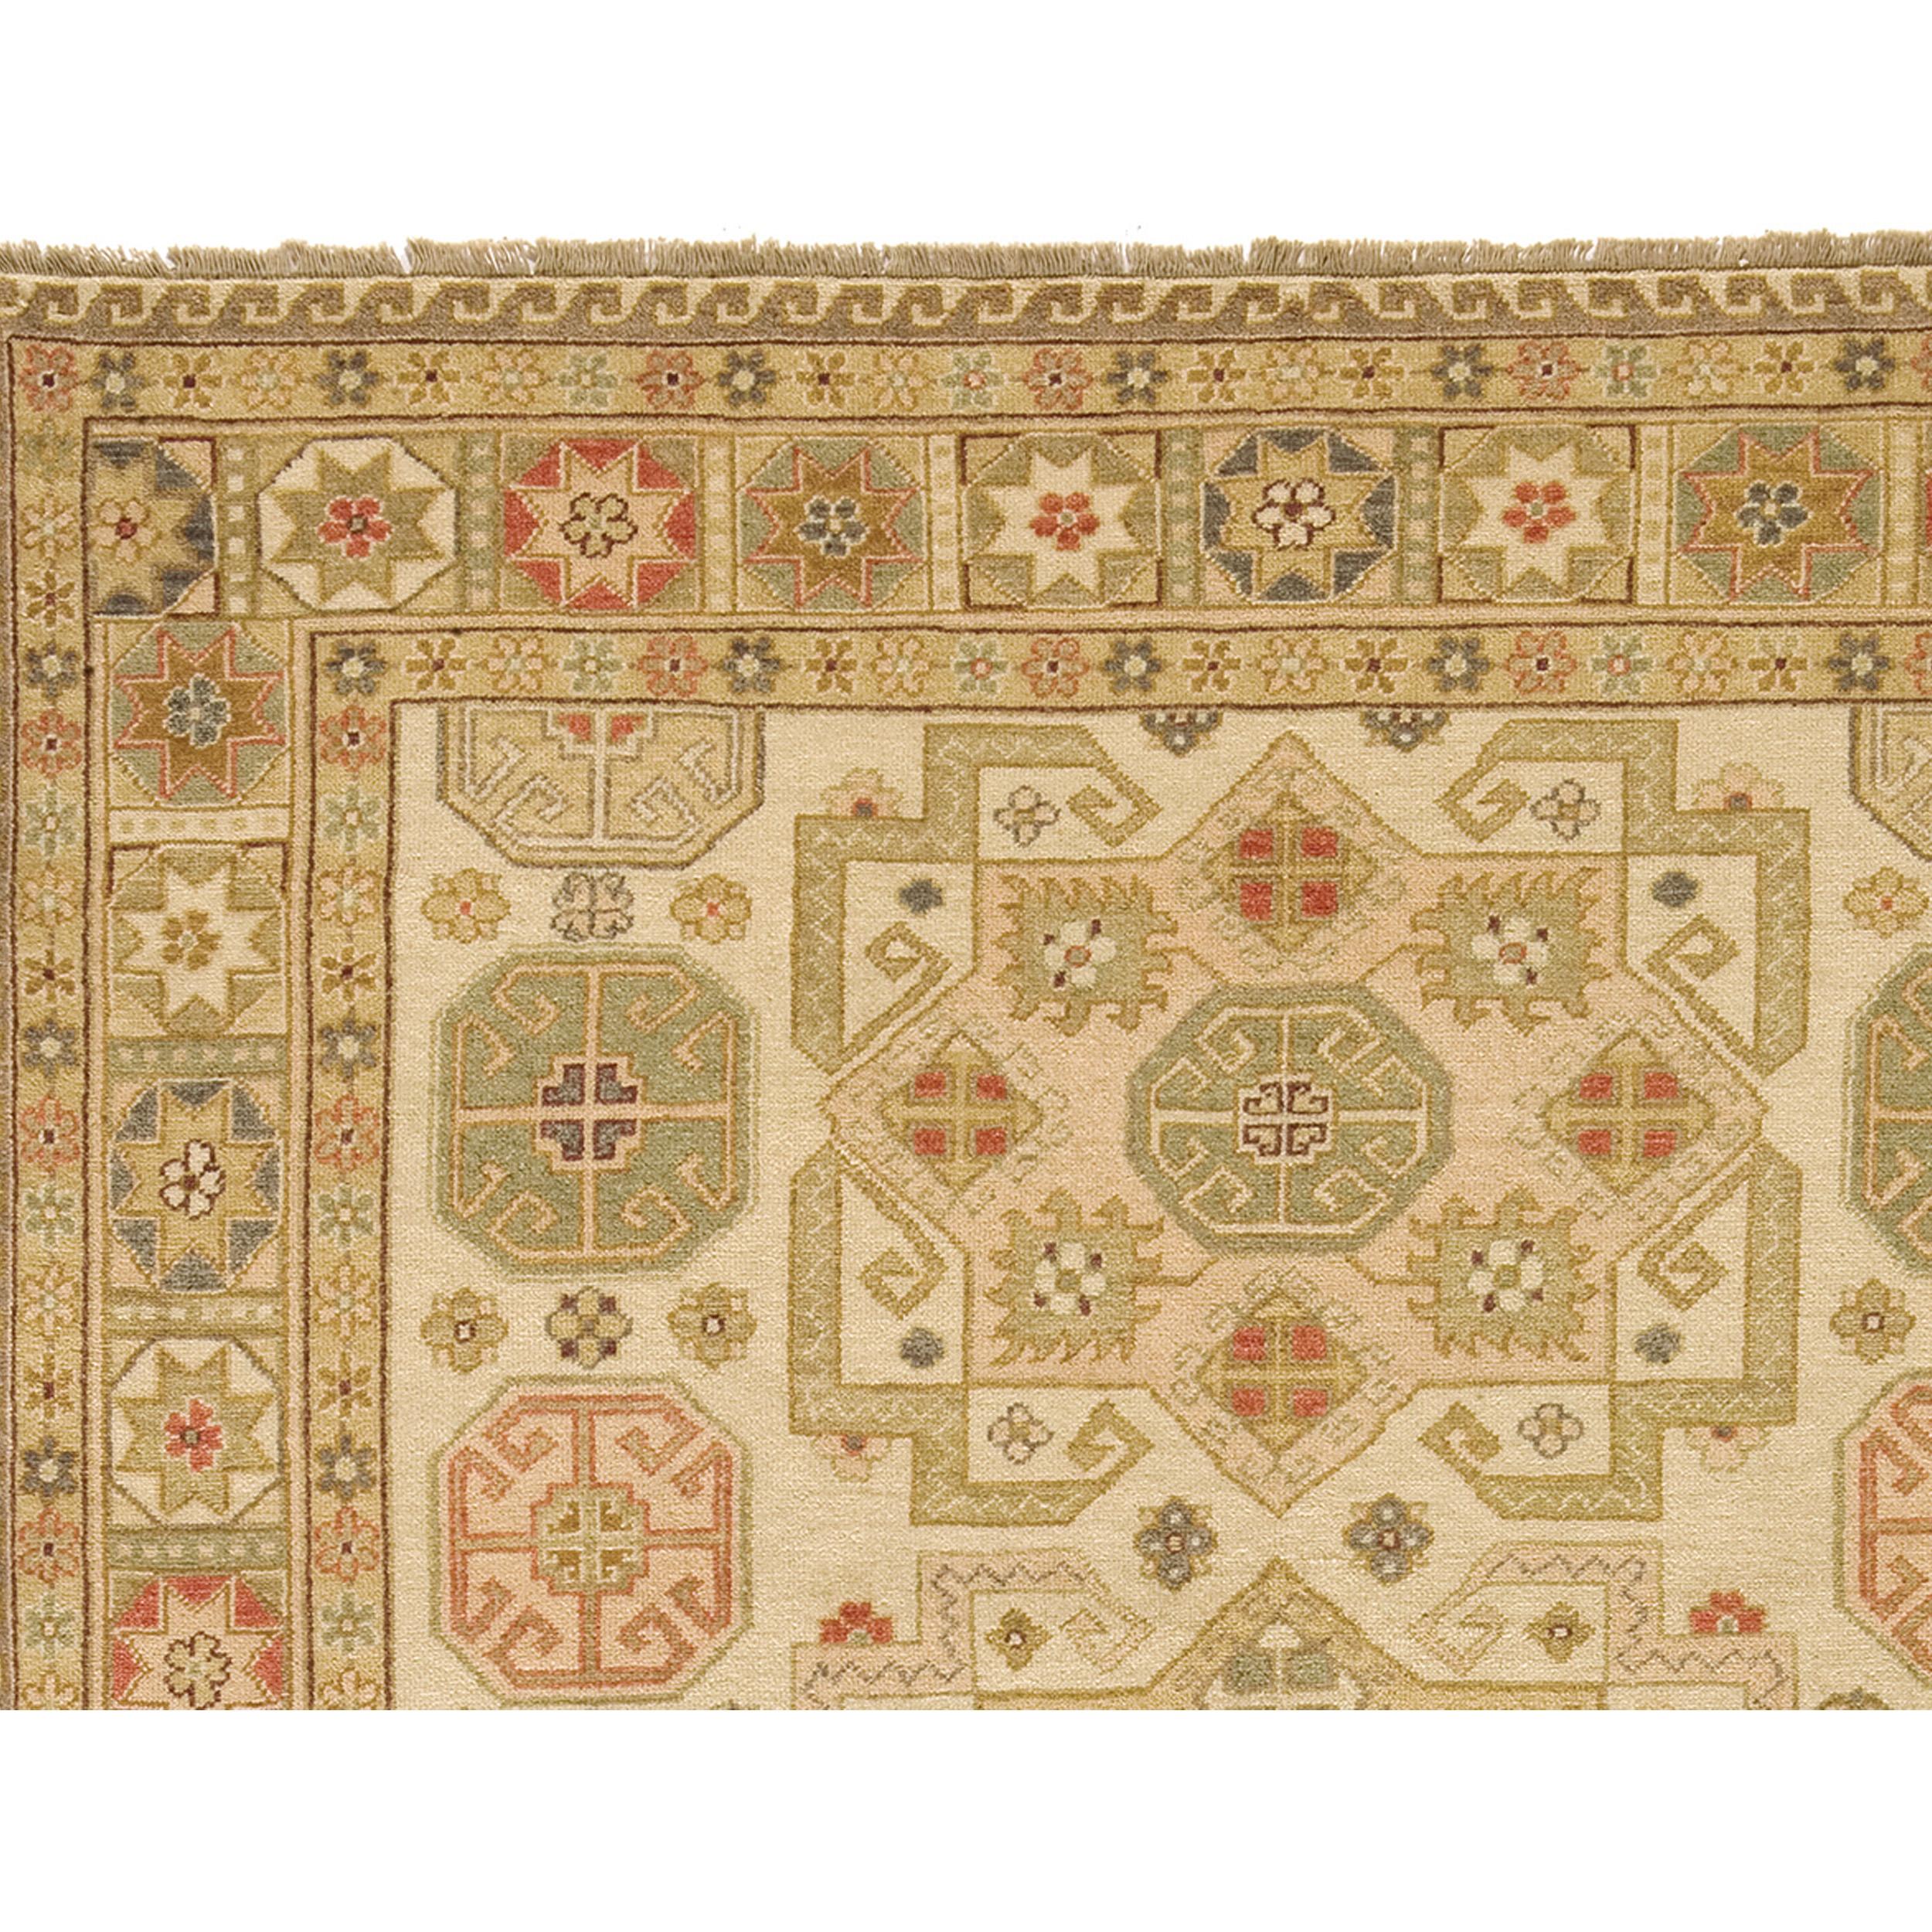 A luxurious traditional hand-knotted rug, which has been meticulously crafted, is made from the finest wool. This rug transcends its utilitarian purpose, becoming a work of art that delights the senses and harmonizes perfectly with a variety of home